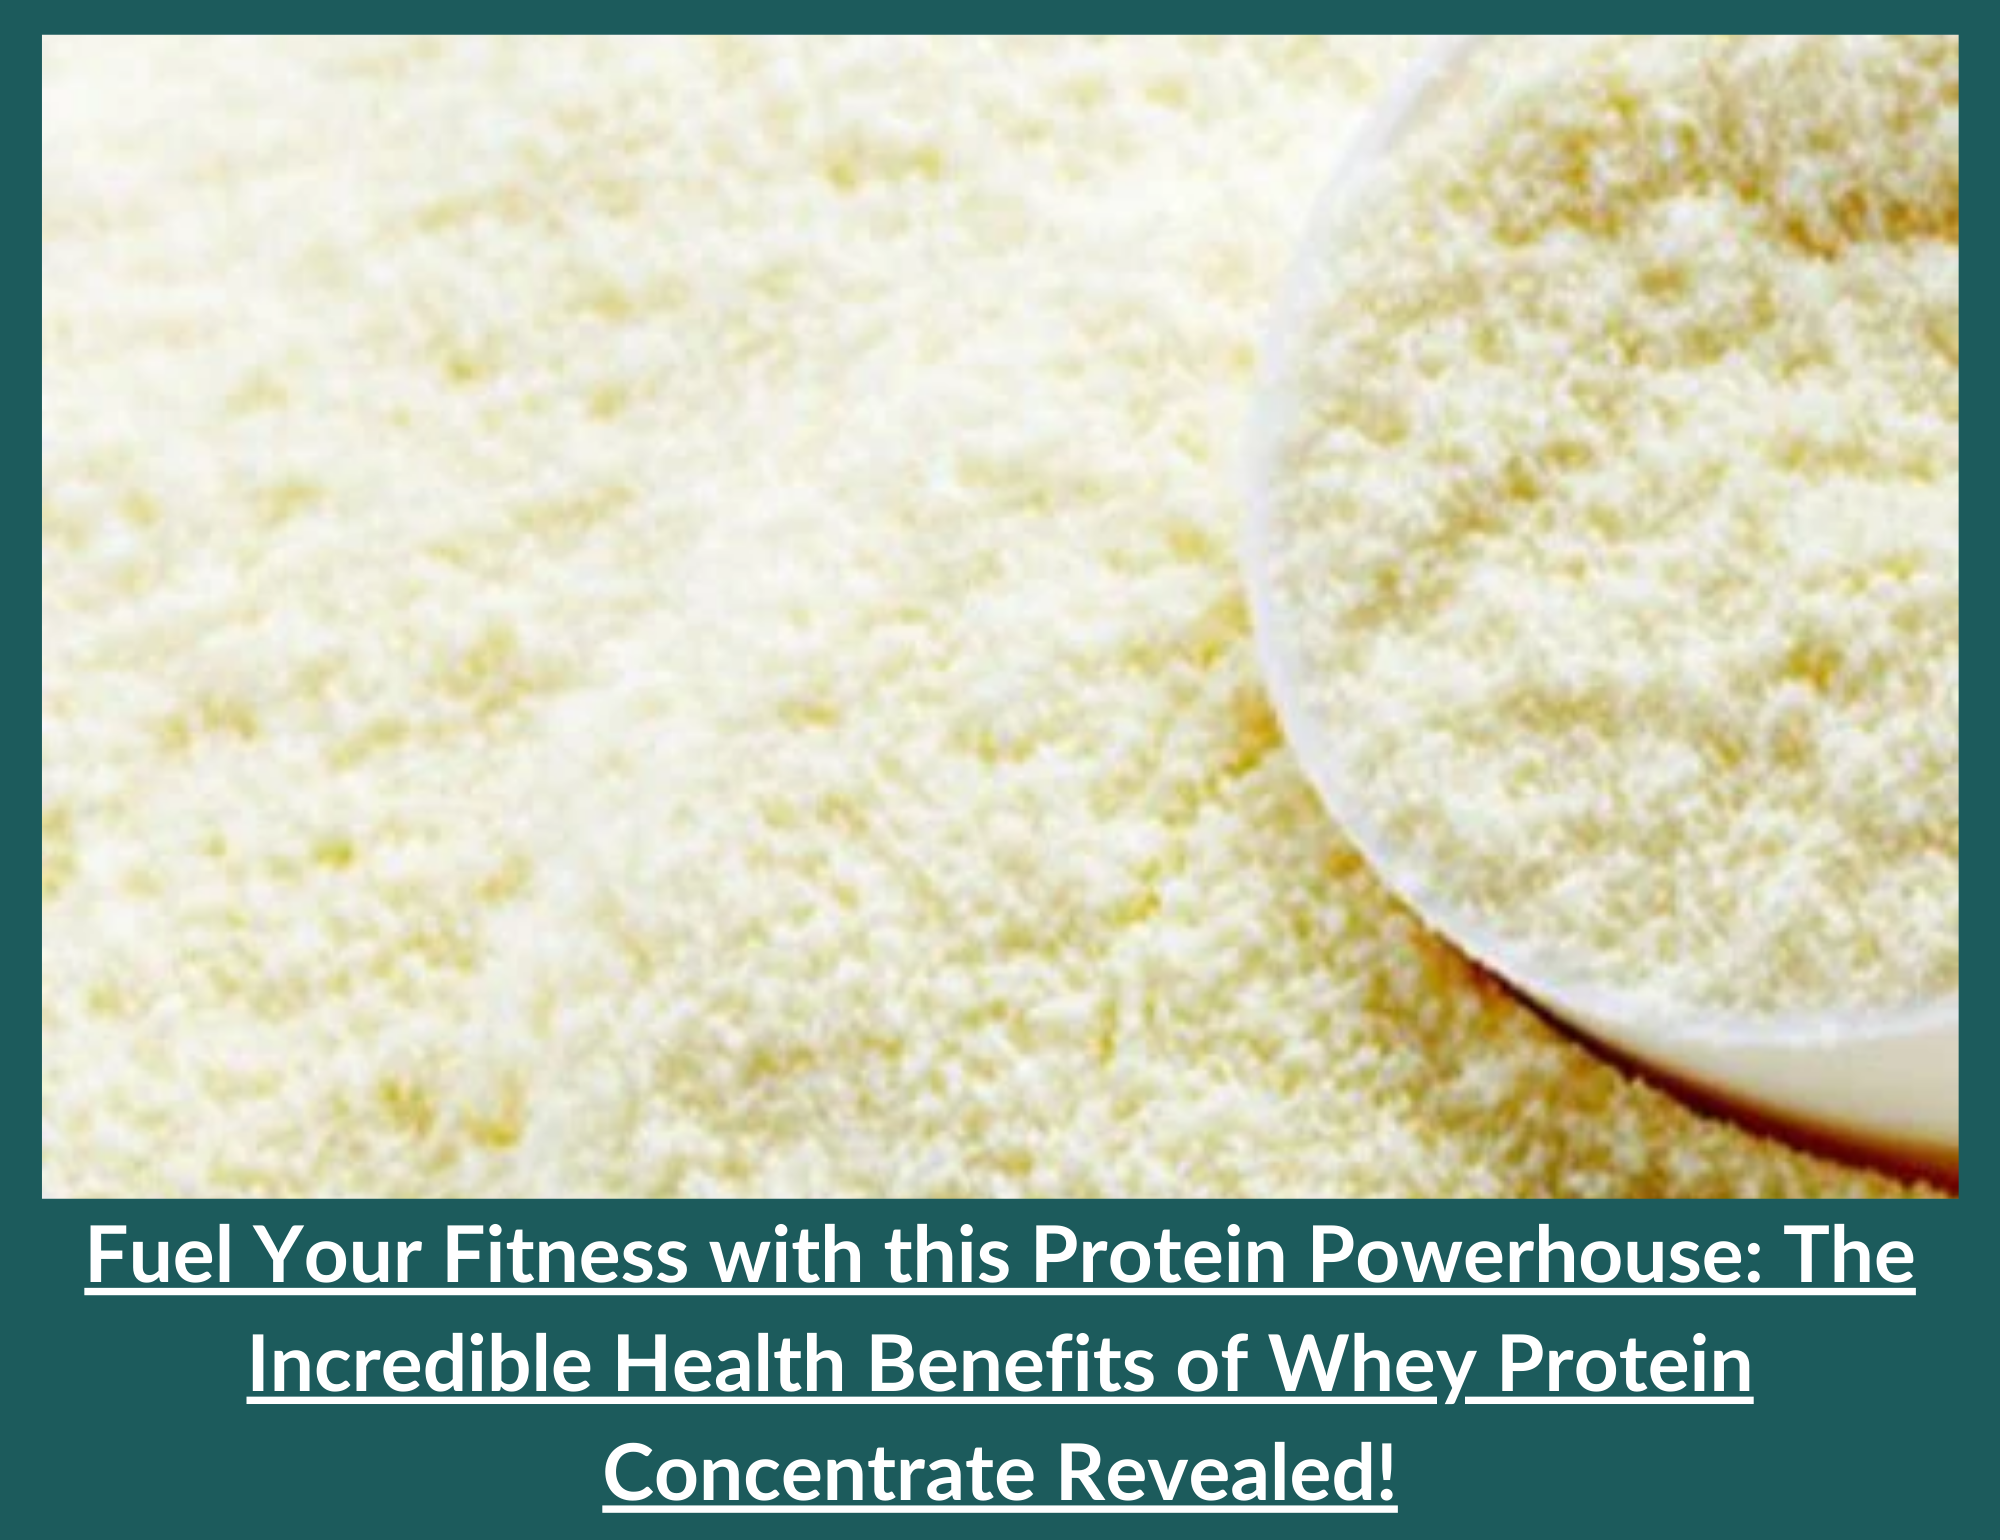 Health Benefits of Whey Protein Concentrate